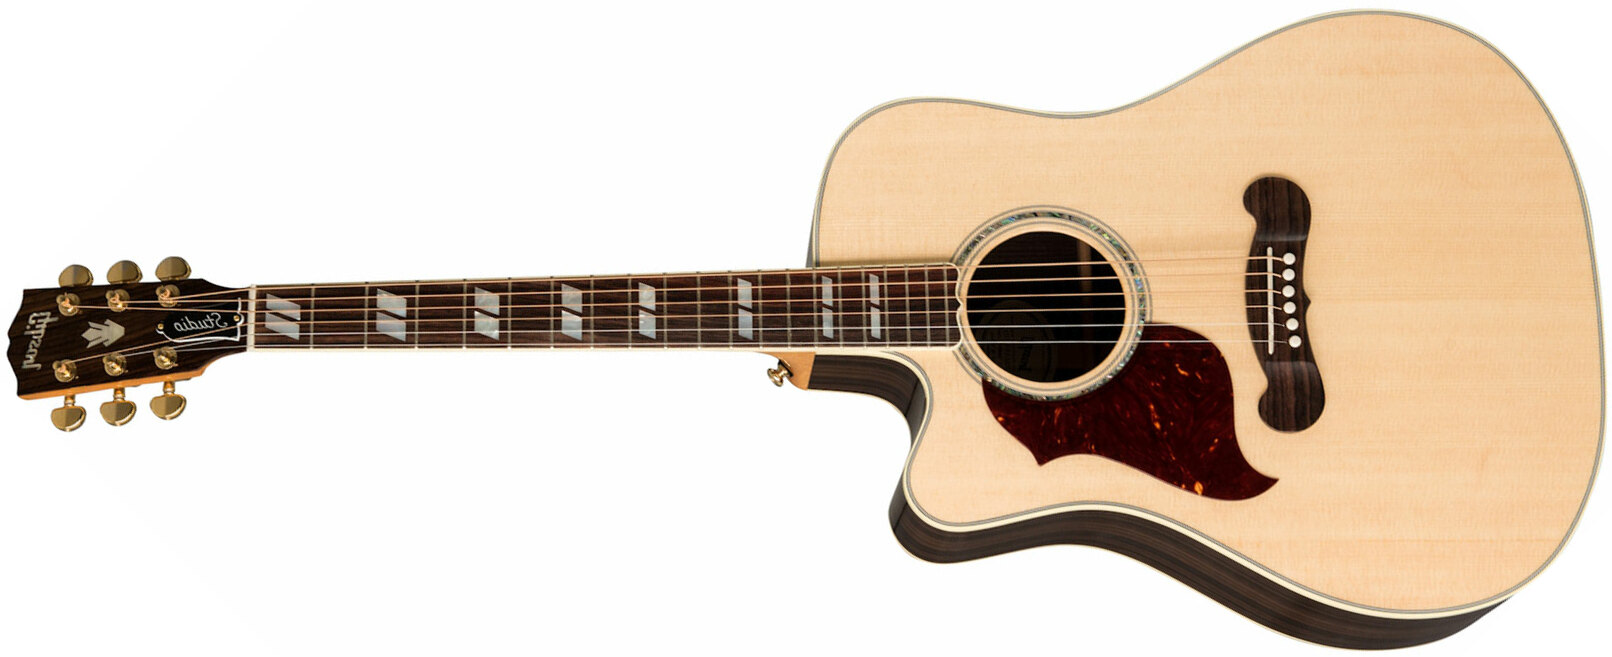 Gibson Songwriter Cutaway Lh Gaucher 2019 Dreadnought Epicea Palissandre Rw - Natural - Westerngitarre & electro - Main picture